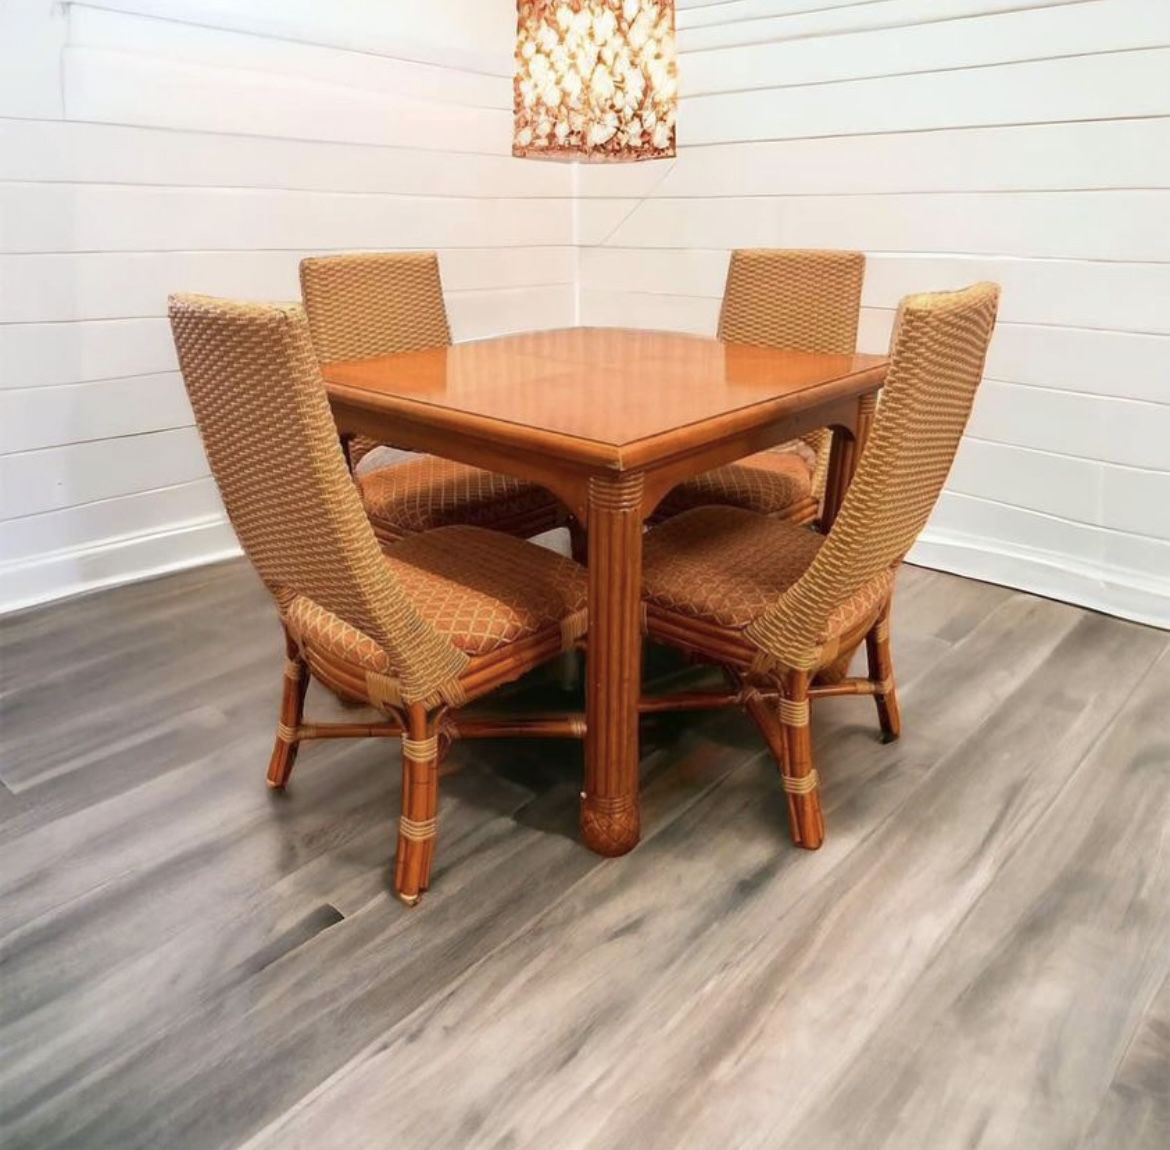 $100 for Orange Brown Square Wood Dining Table Set